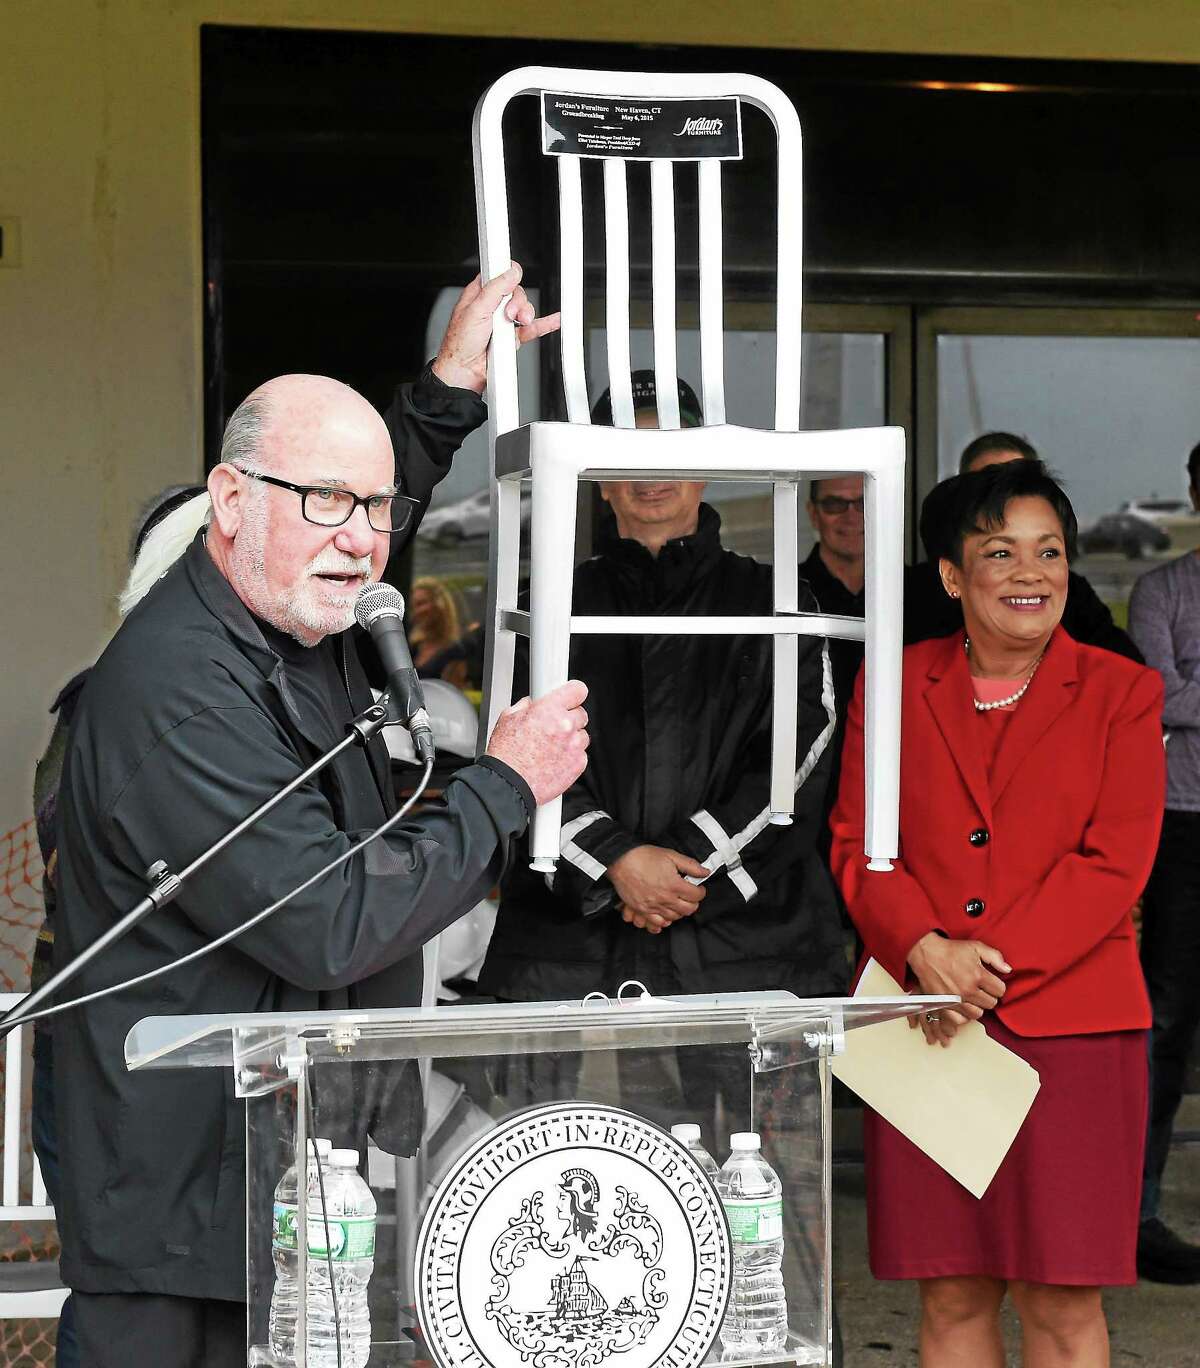 Tatelman presents a chair to New Haven Mayor Toni N. Harp during Wednesday’s ground-breaking.